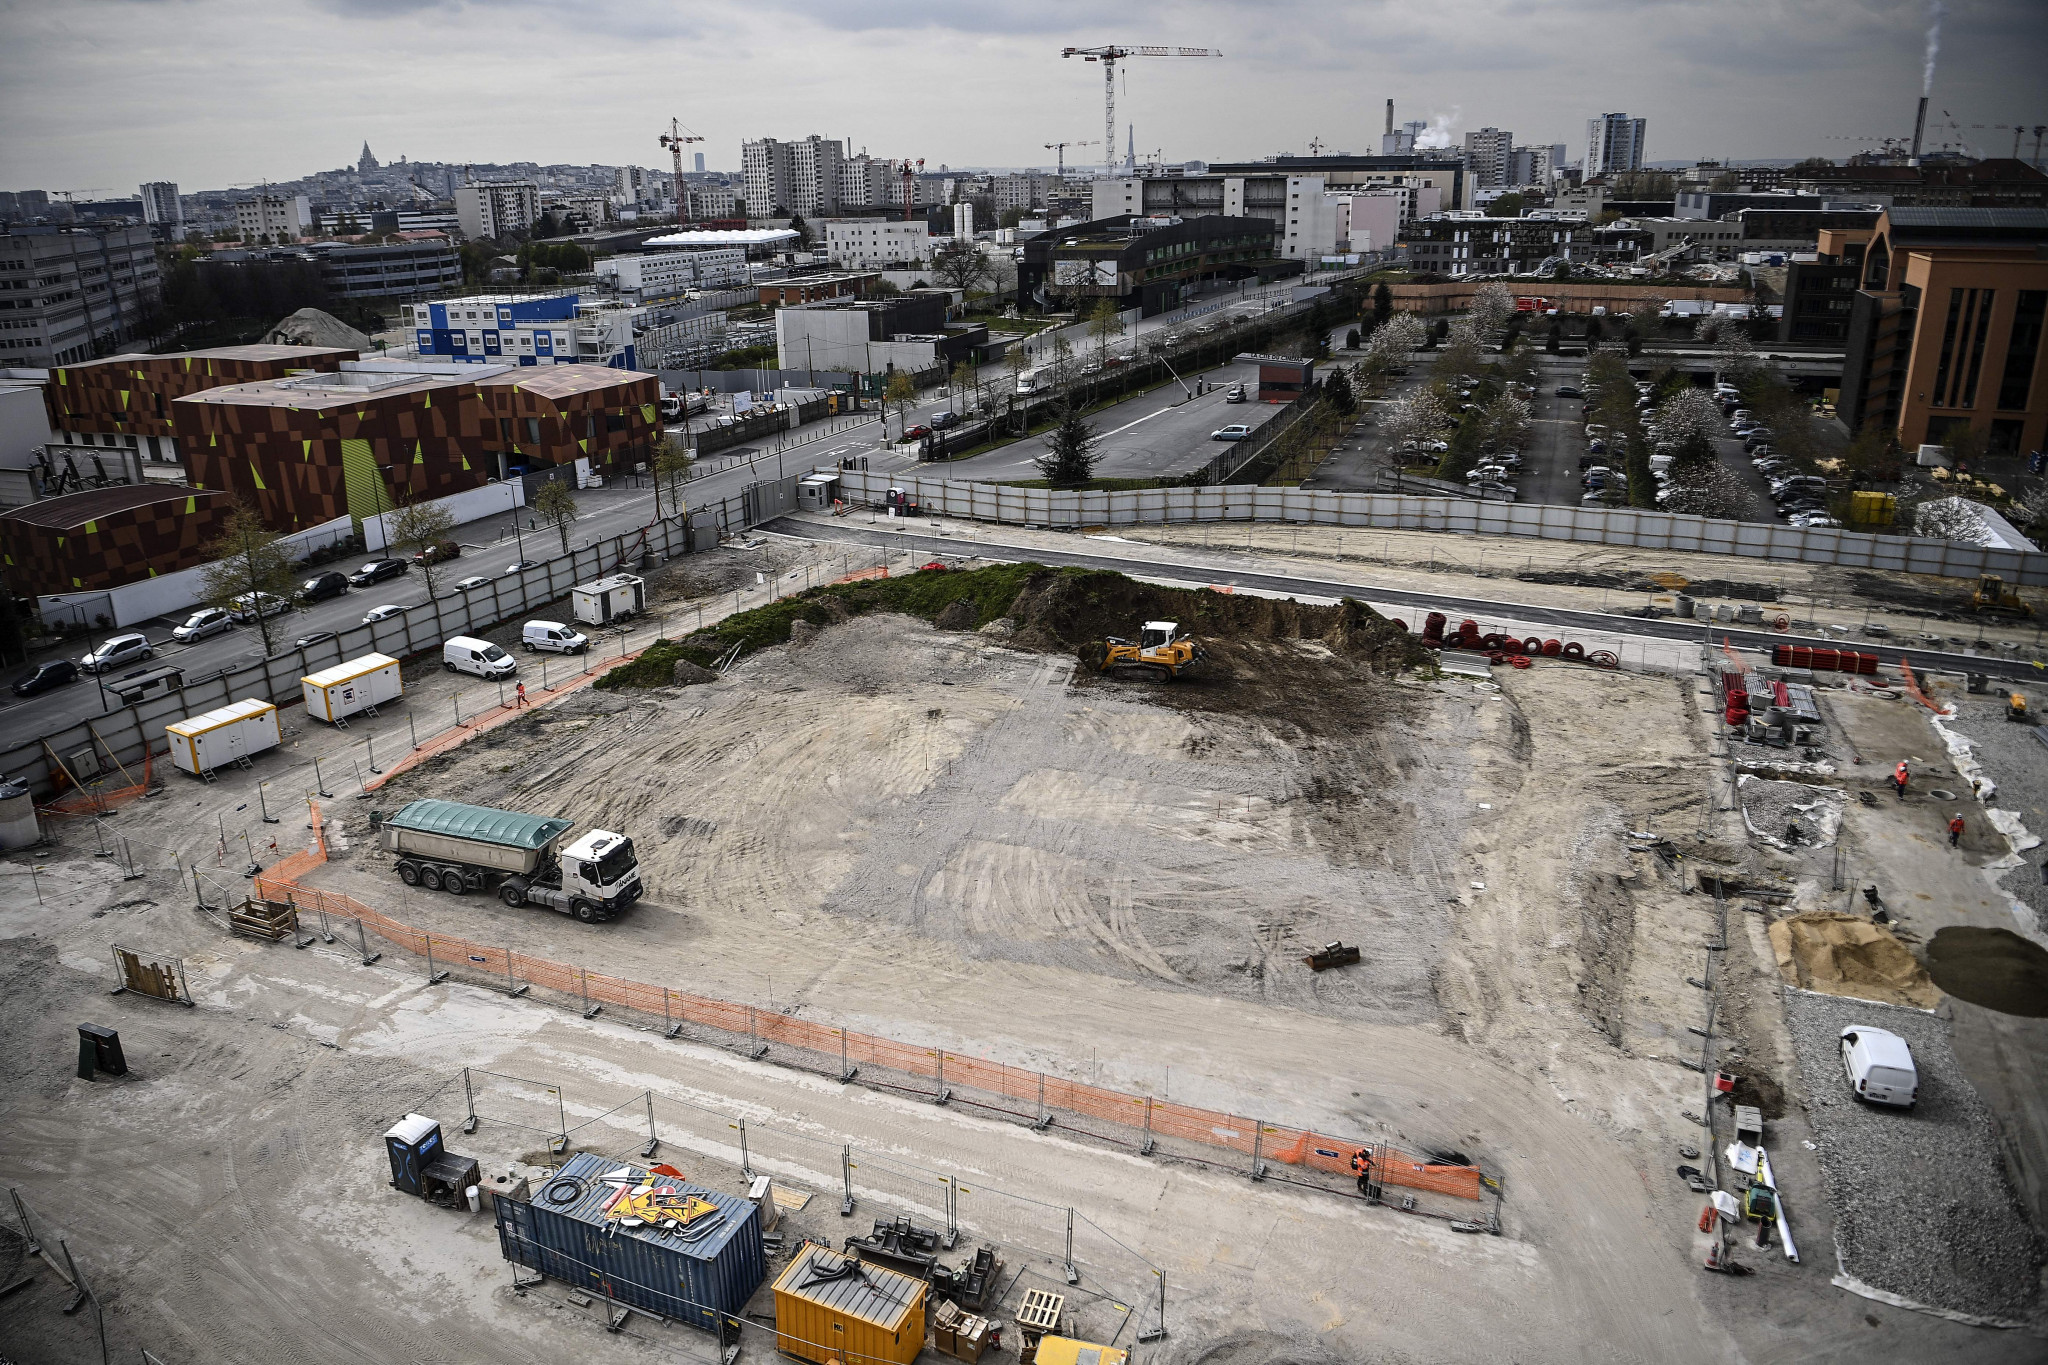 Trade unions request construction site visits for Paris 2024 Olympics facilities